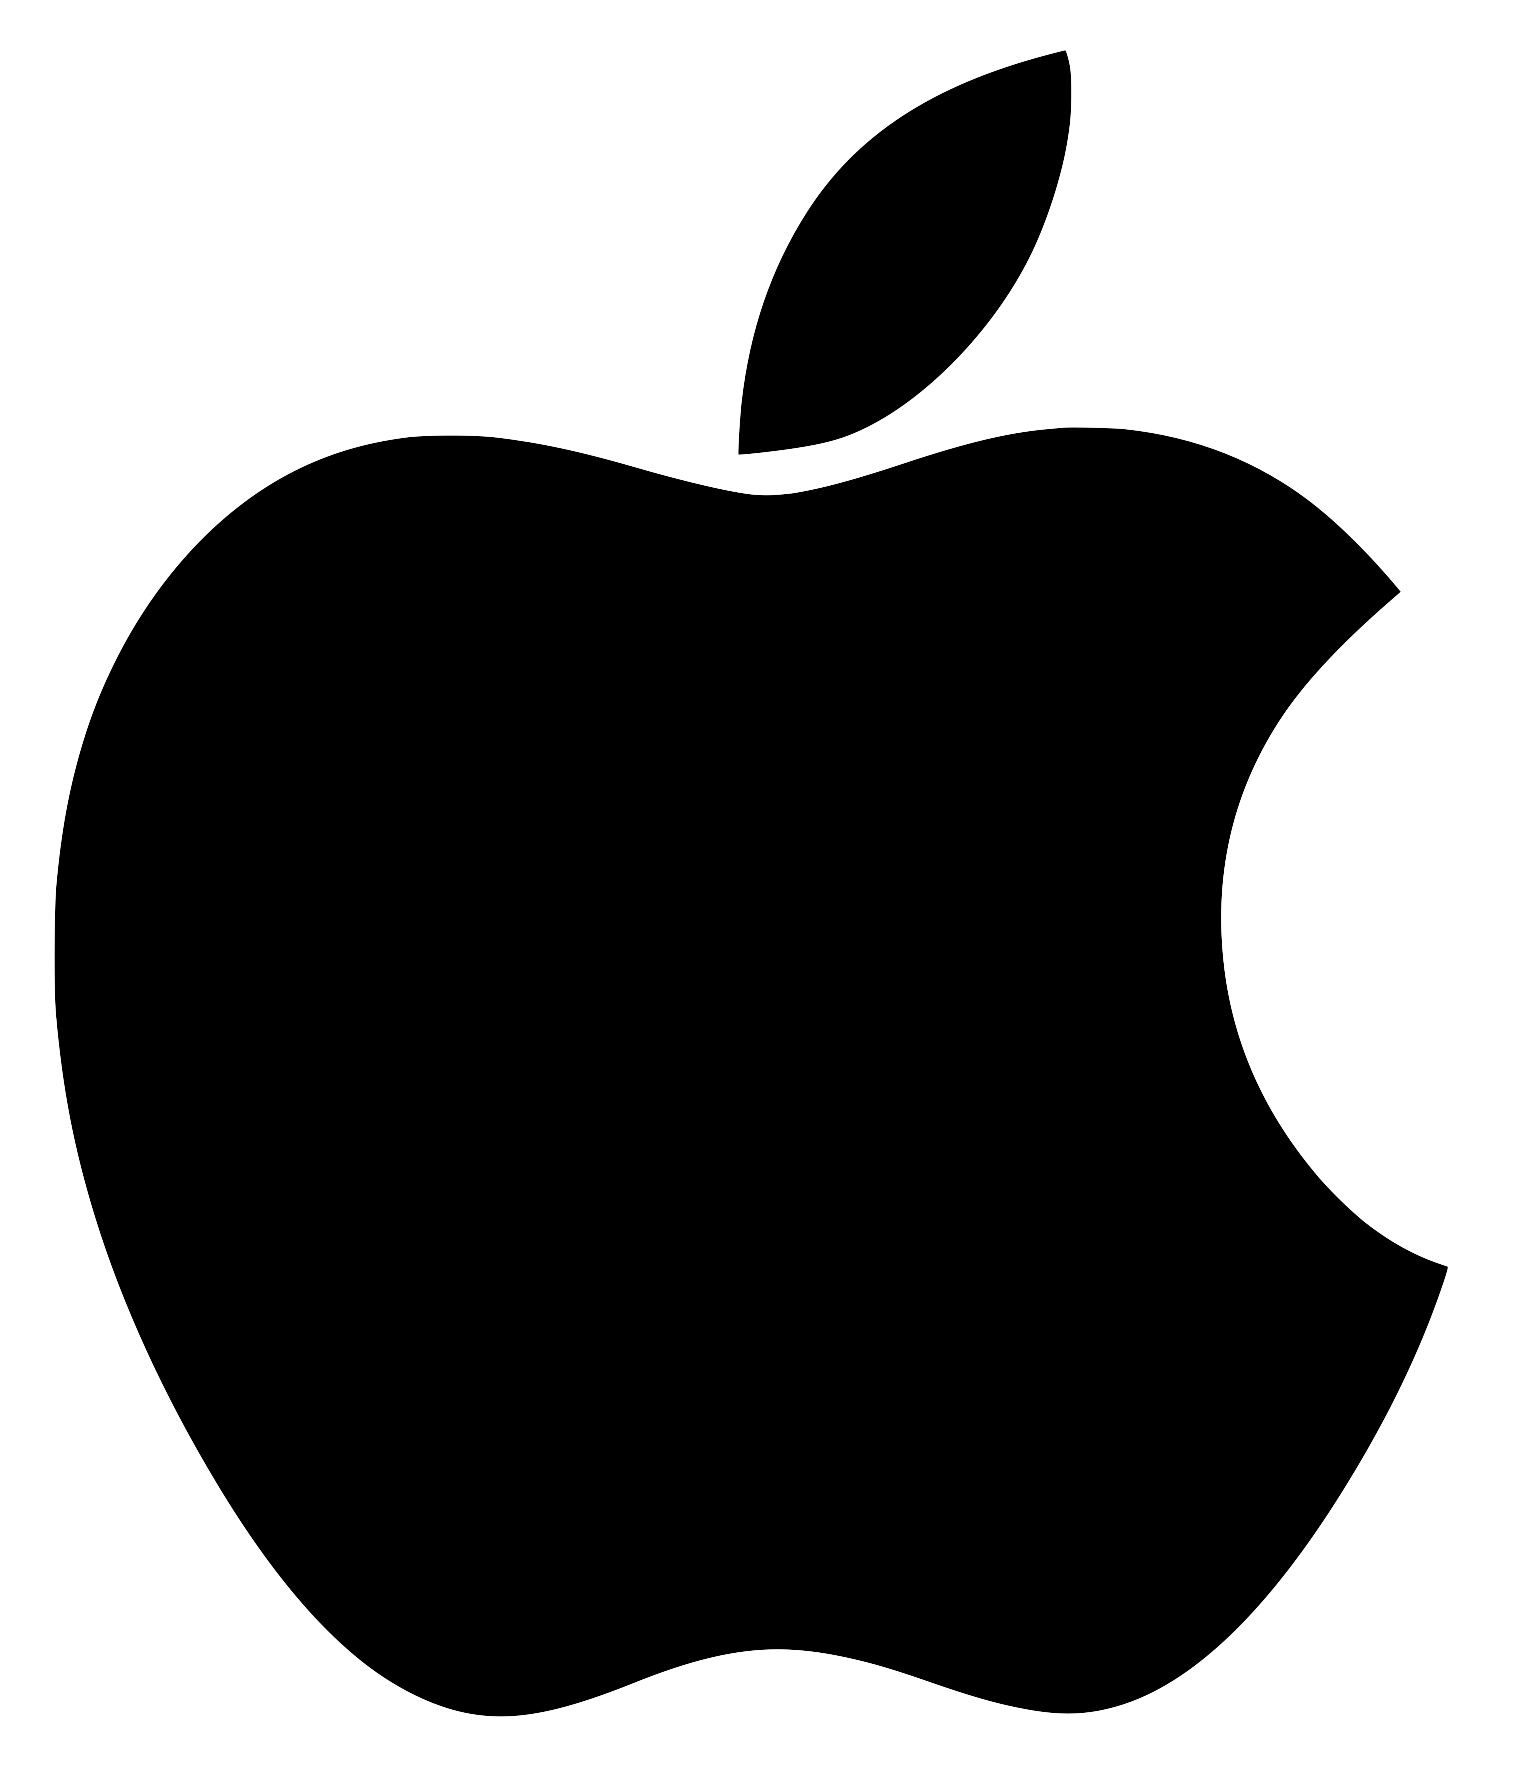 Apple-logo-black-and-white.png